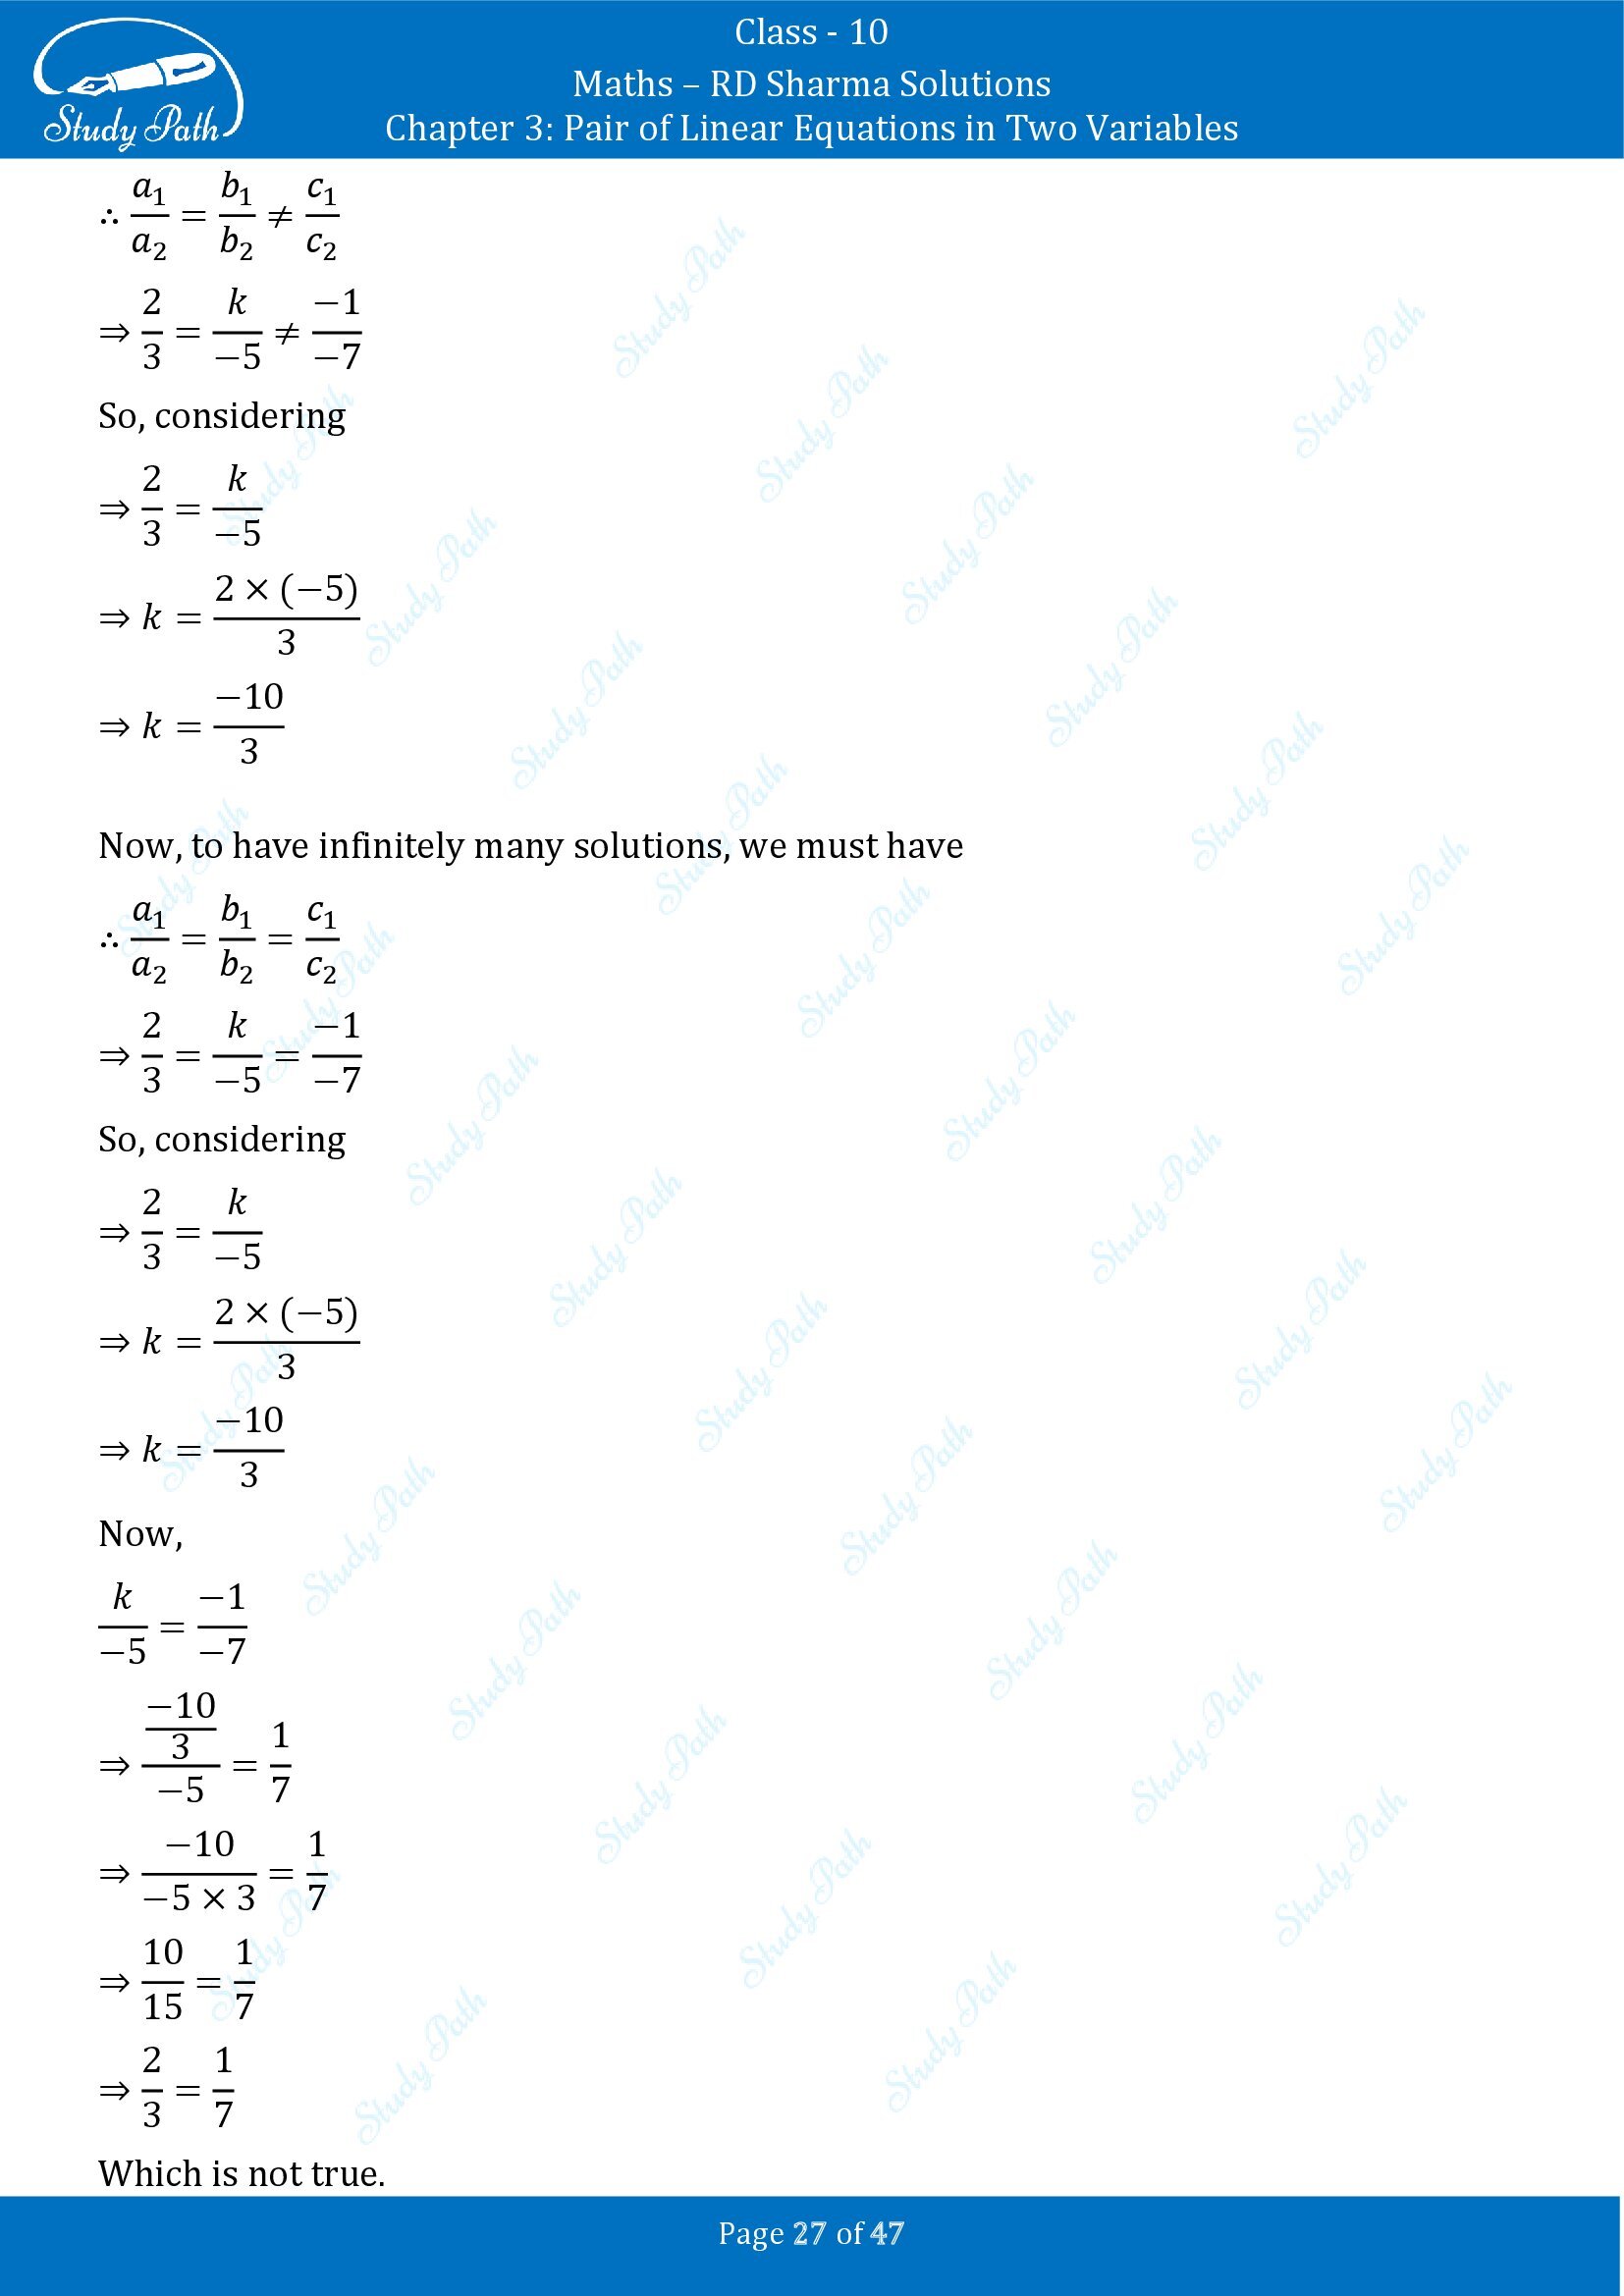 RD Sharma Solutions Class 10 Chapter 3 Pair of Linear Equations in Two Variables Exercise 3.5 00027